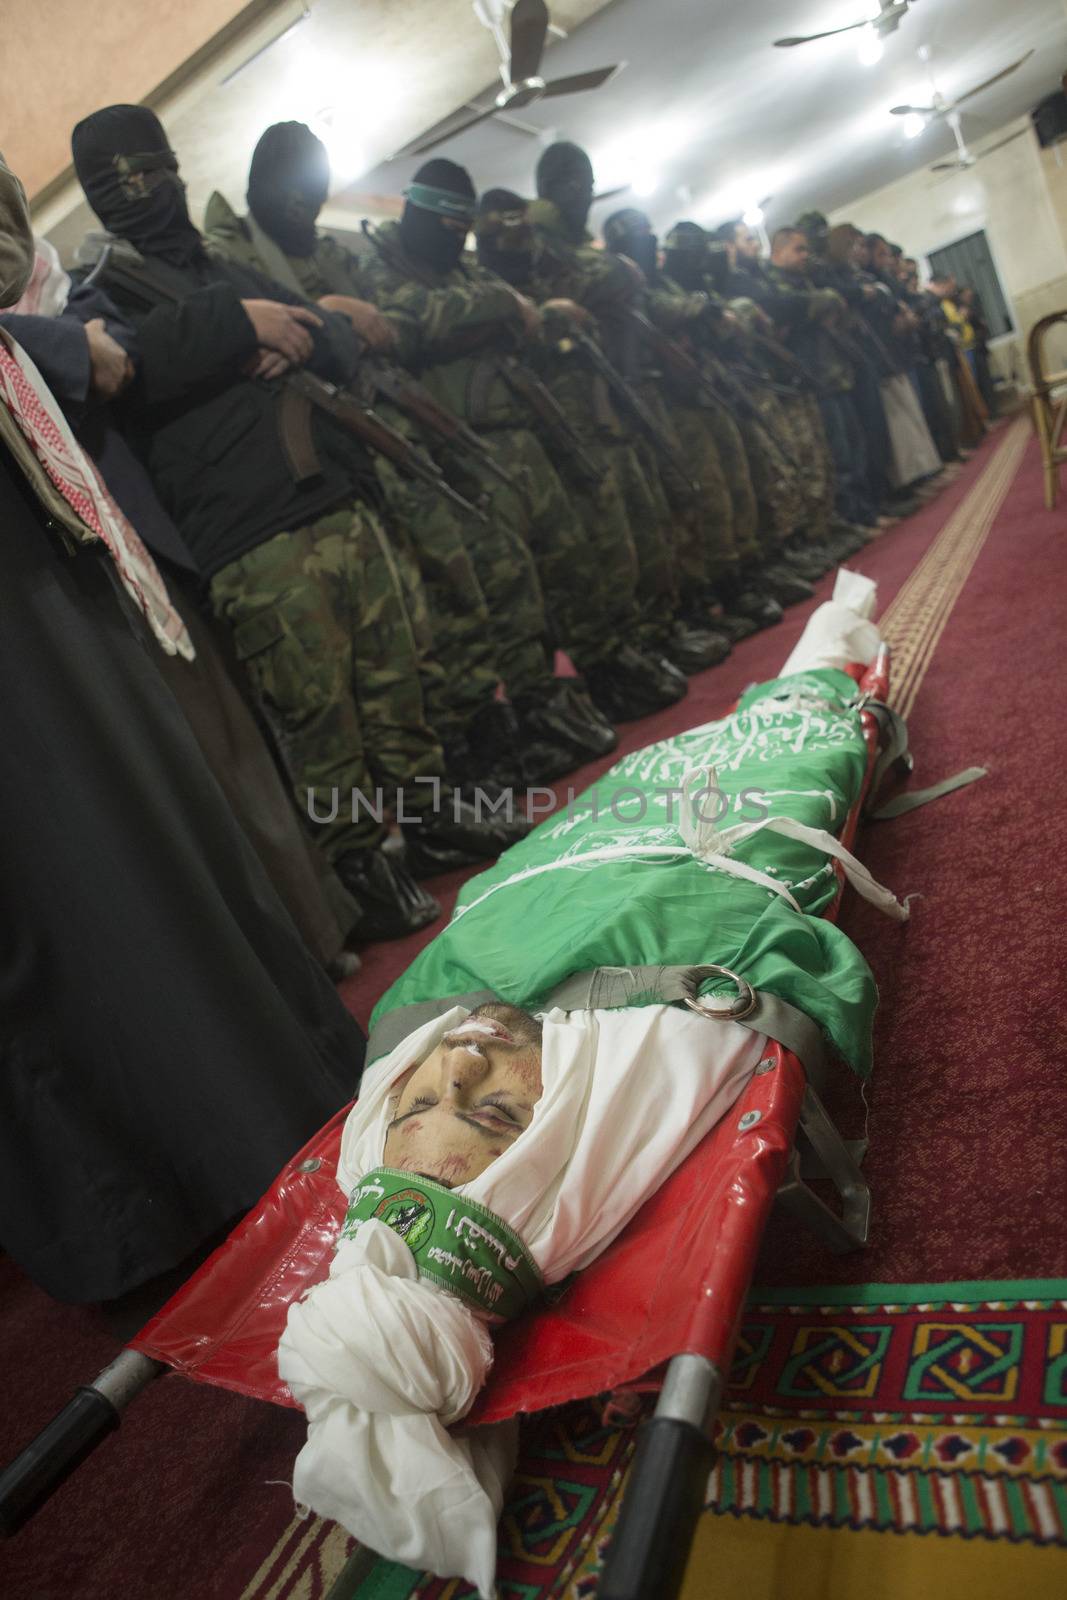 GAZA, Khan Yunis: [Warning: graphic content] The body of Marwan Maarouf is laid to rest by Hamas' Al-Qassam Brigades during a funeral service in Khan Yunis, the Gaza Strip on February 9, 2016. The 27-year-old man was reportedly killed in one of several recent tunnel collapses in southern Gaza since late January.